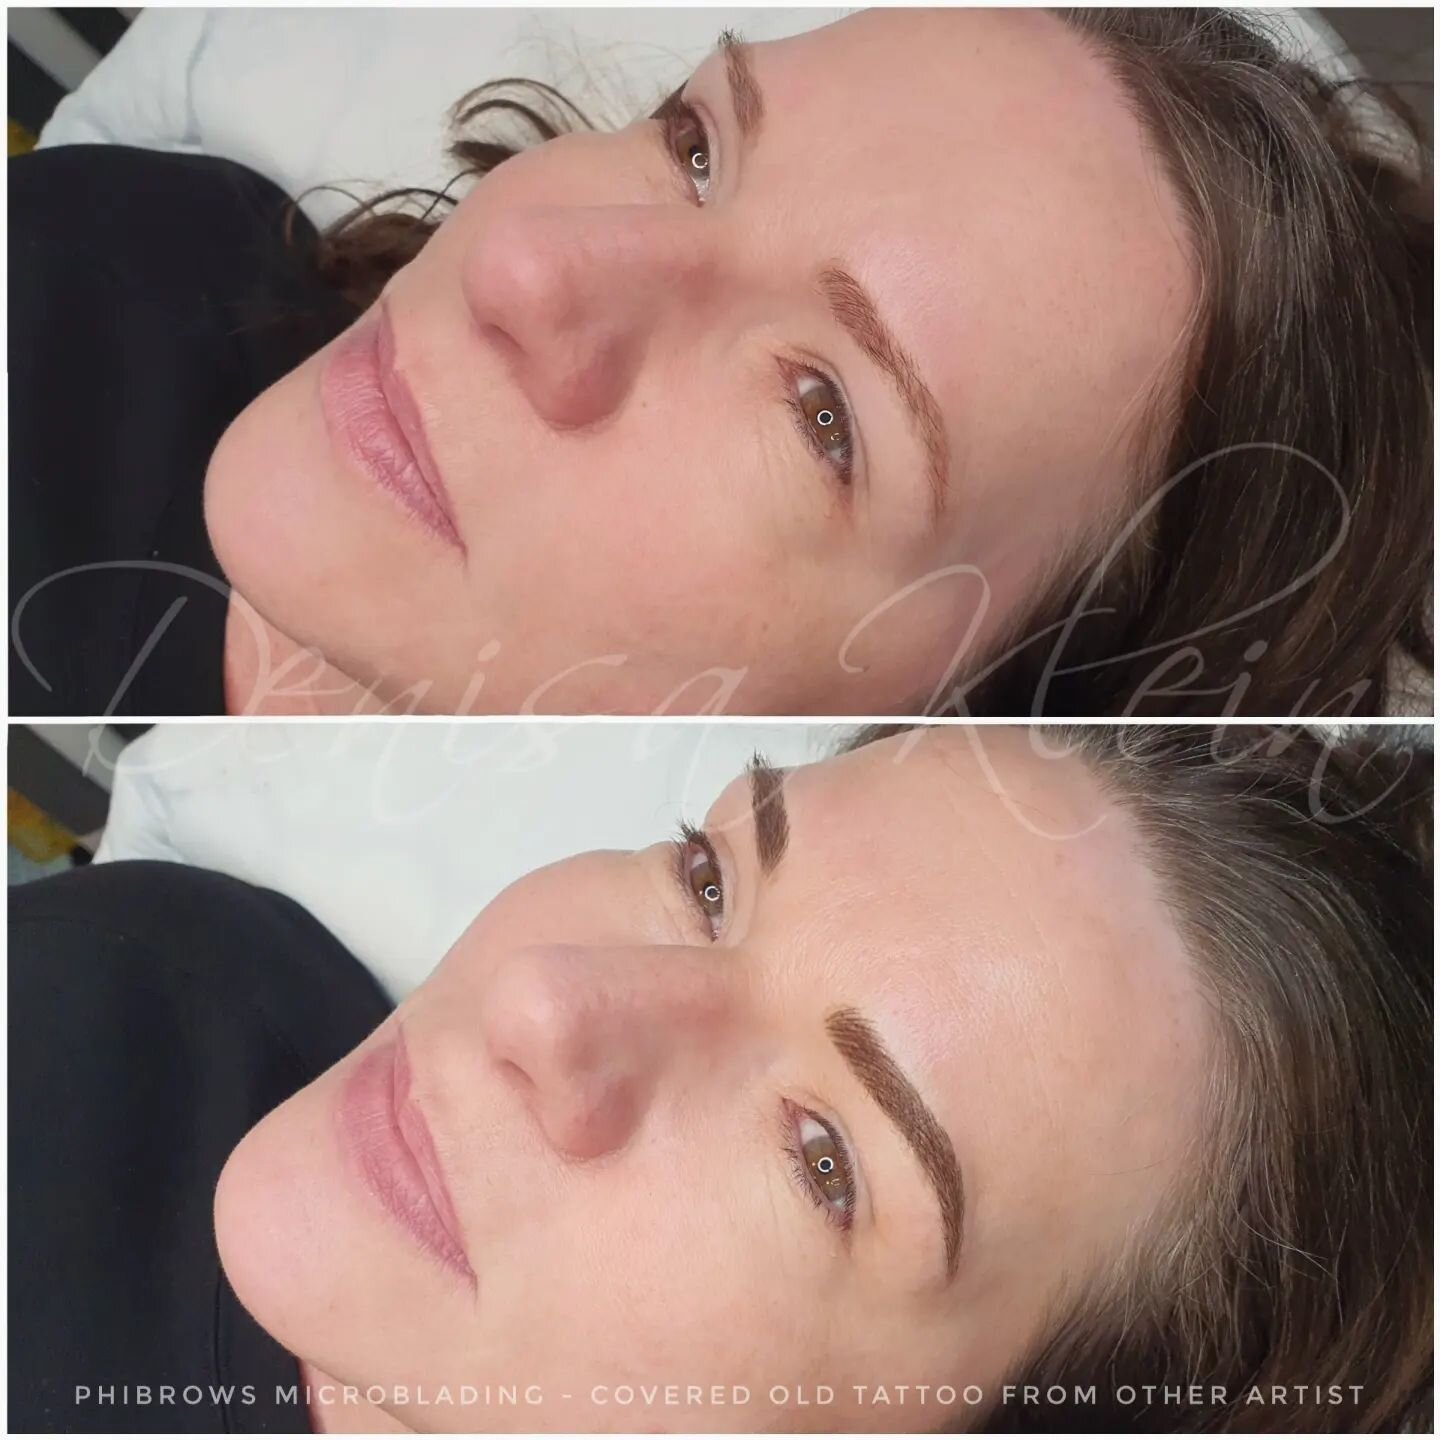 Covered old microblading 🙌
My client has some old microblading she wanted redone. Previous work was done elsewhere. 
Please be aware not all old work can be covered. 9/10 I request removal first! There are factors I need to consider and I&rsquo;m no